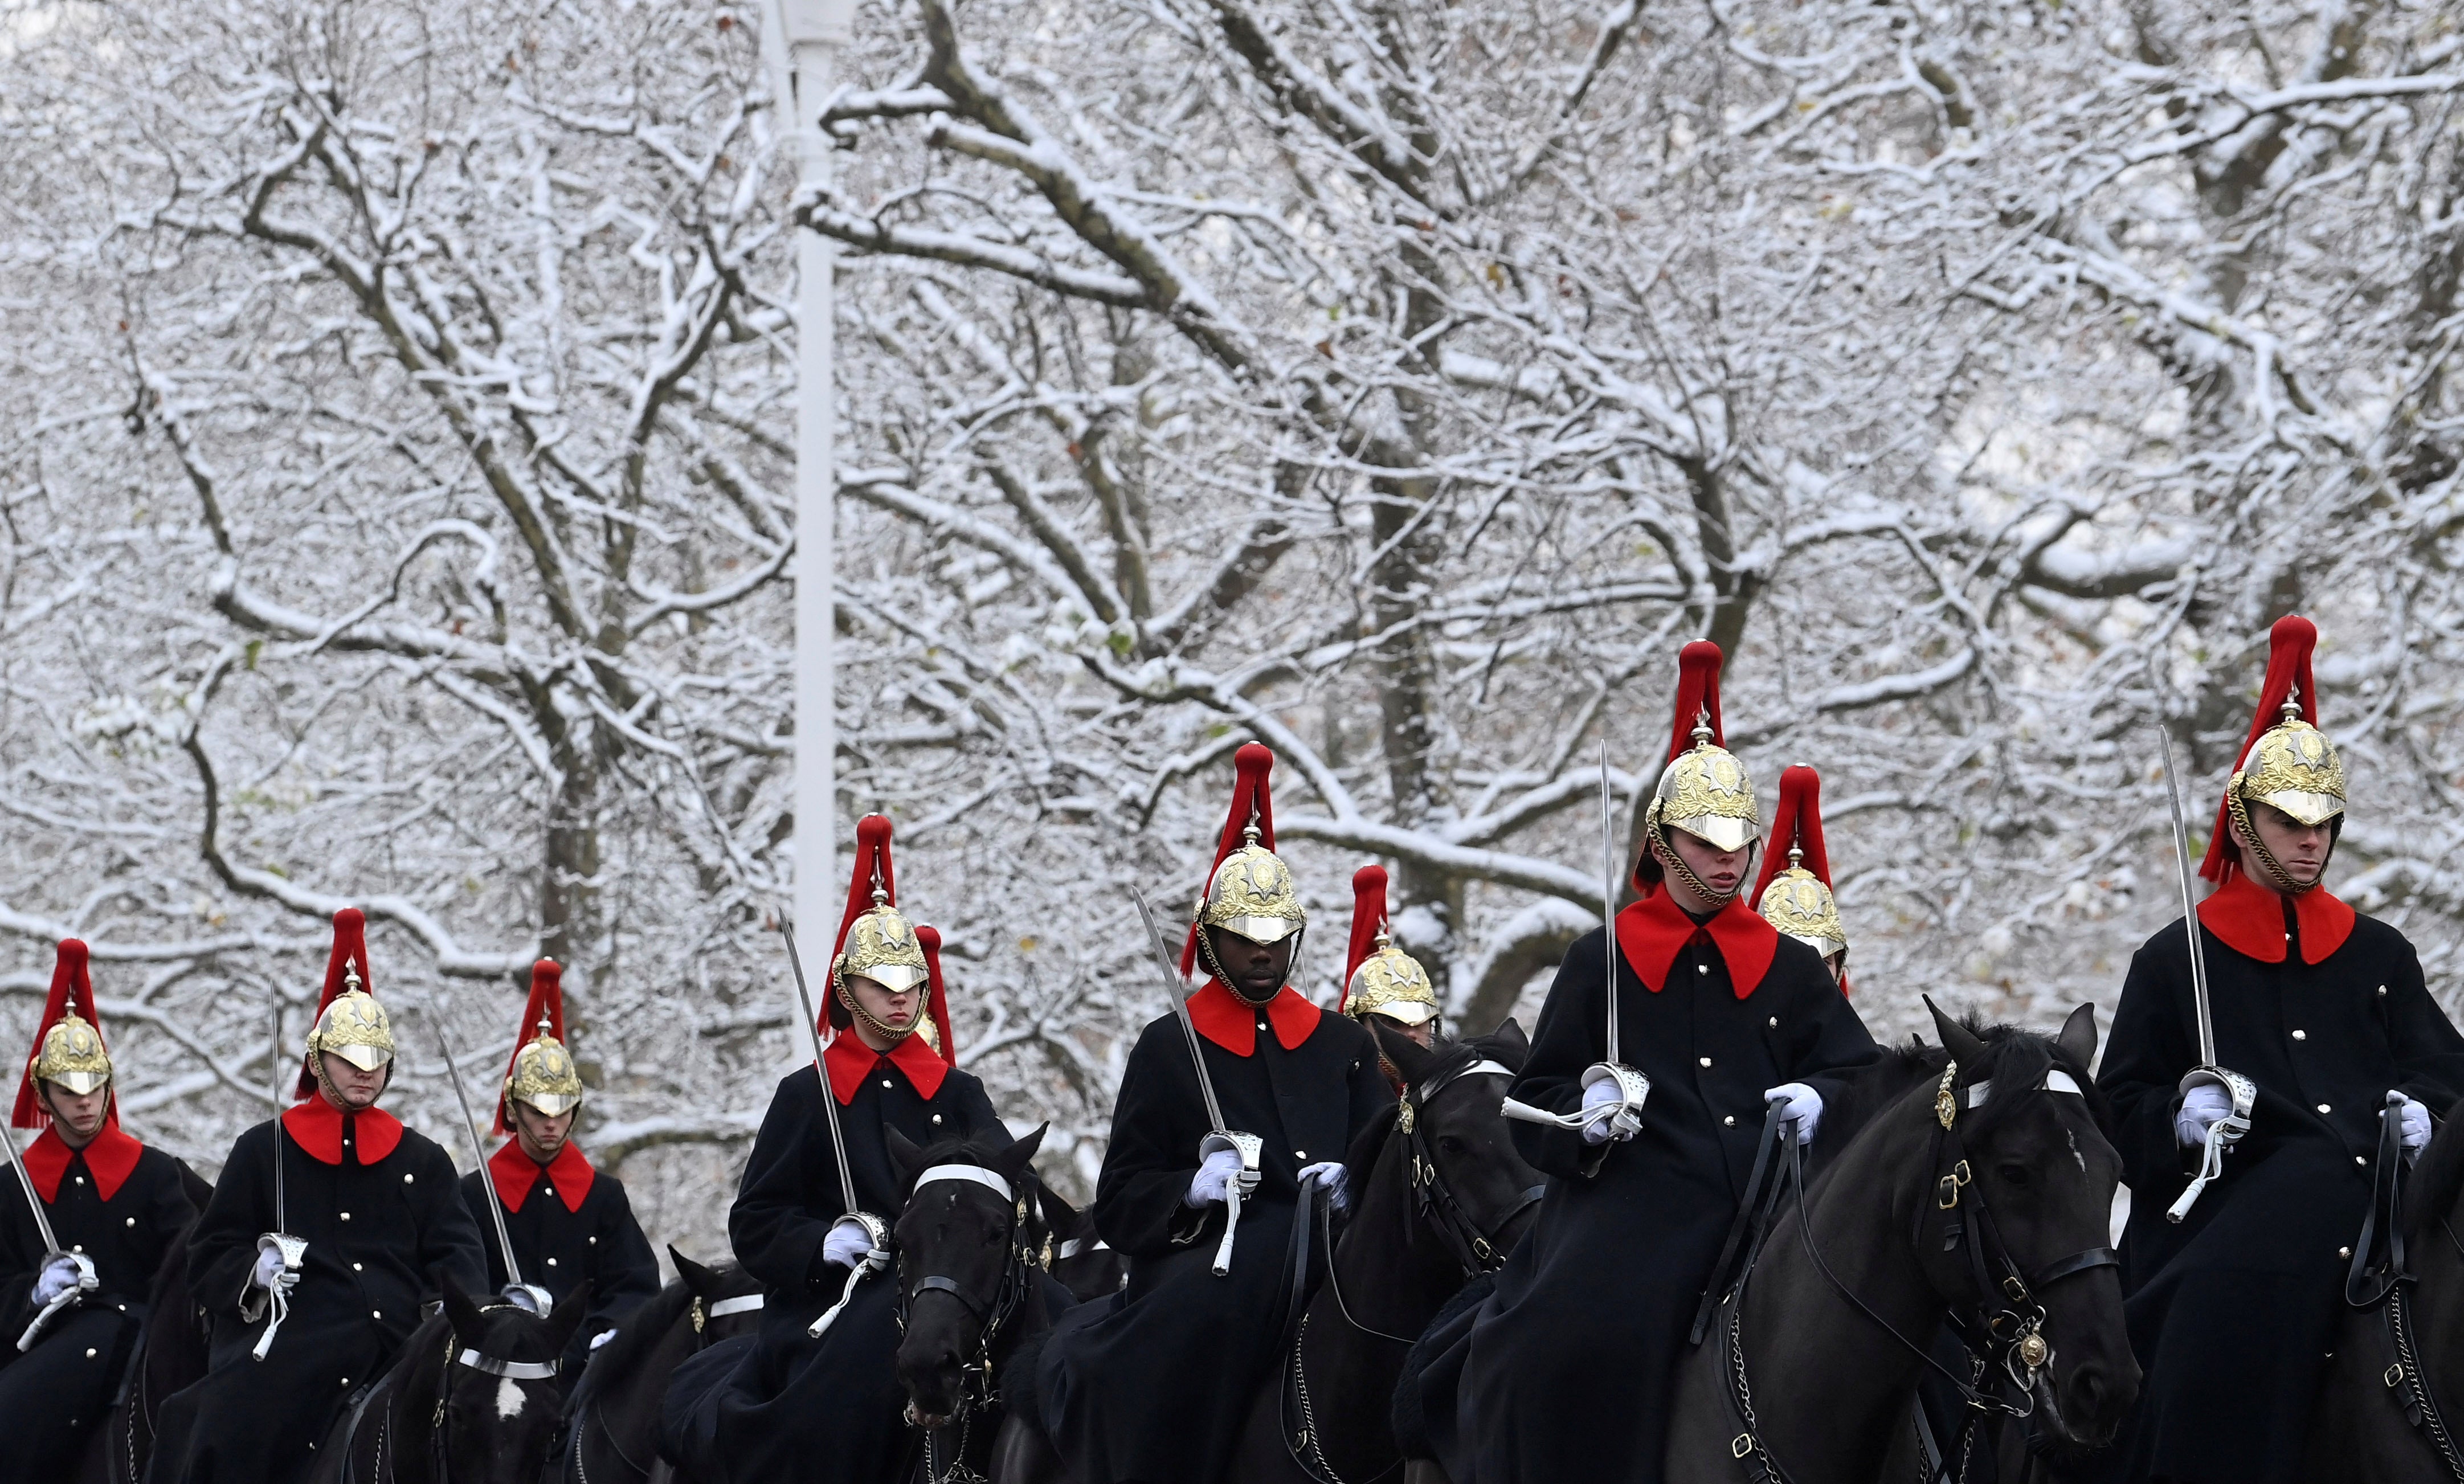 Members of the Household Cavalry take part in ceremonial duties following snowfall on Monday